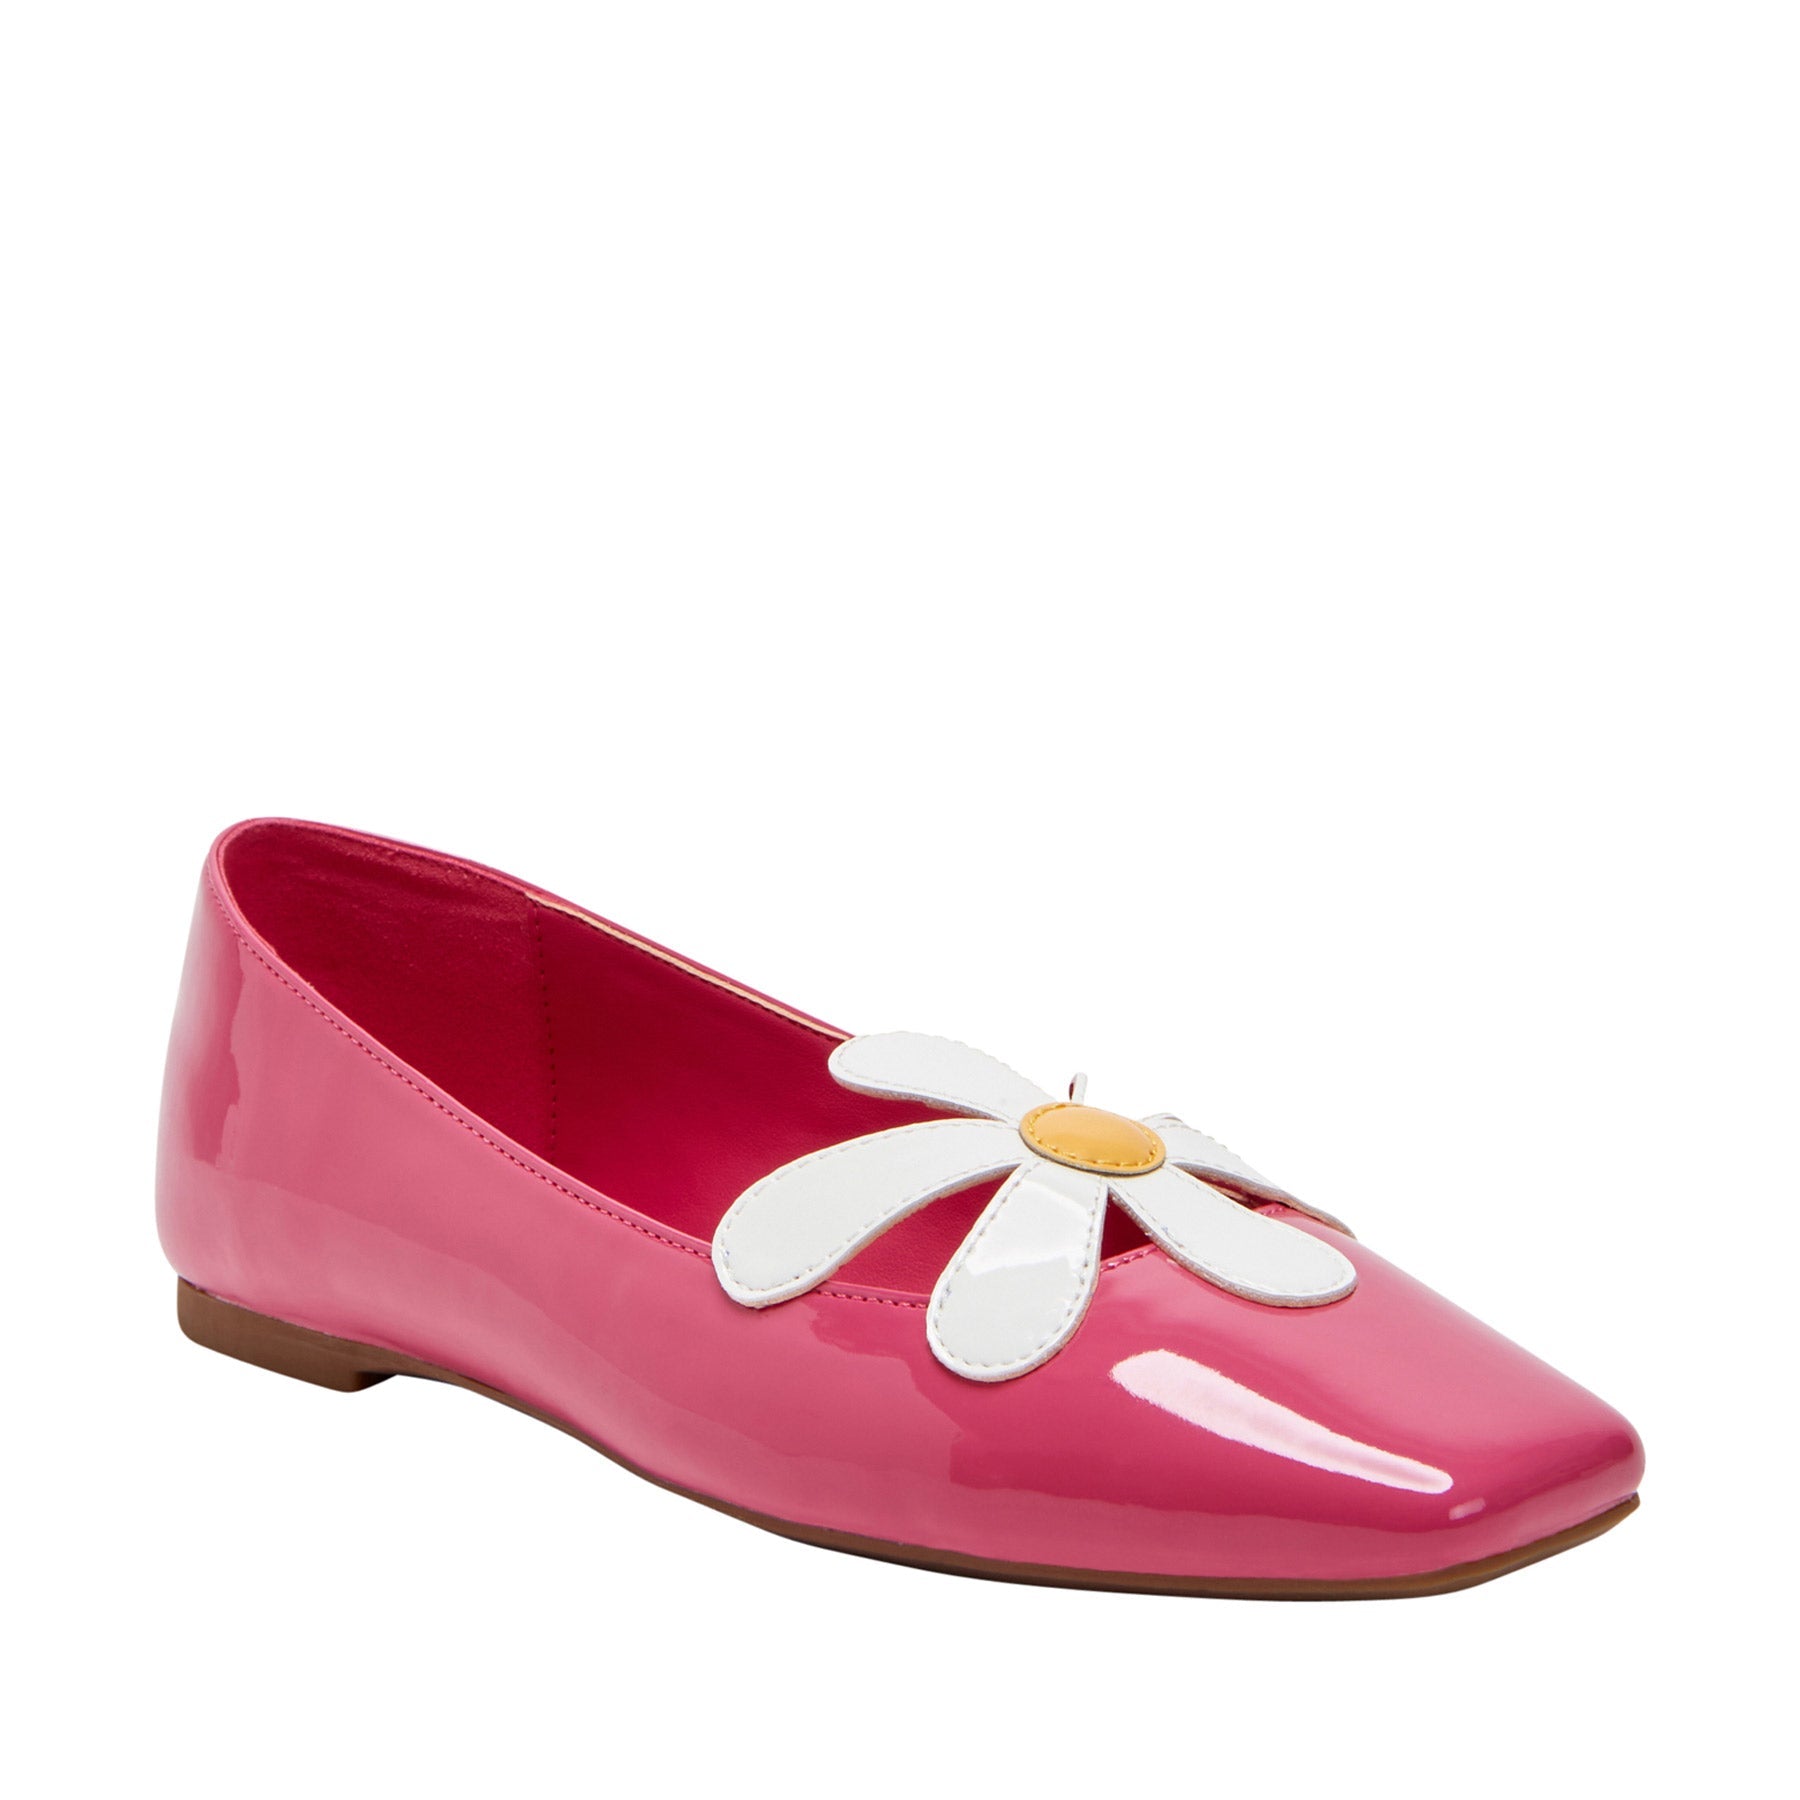 Dreamy Rose patent leather ballet flats